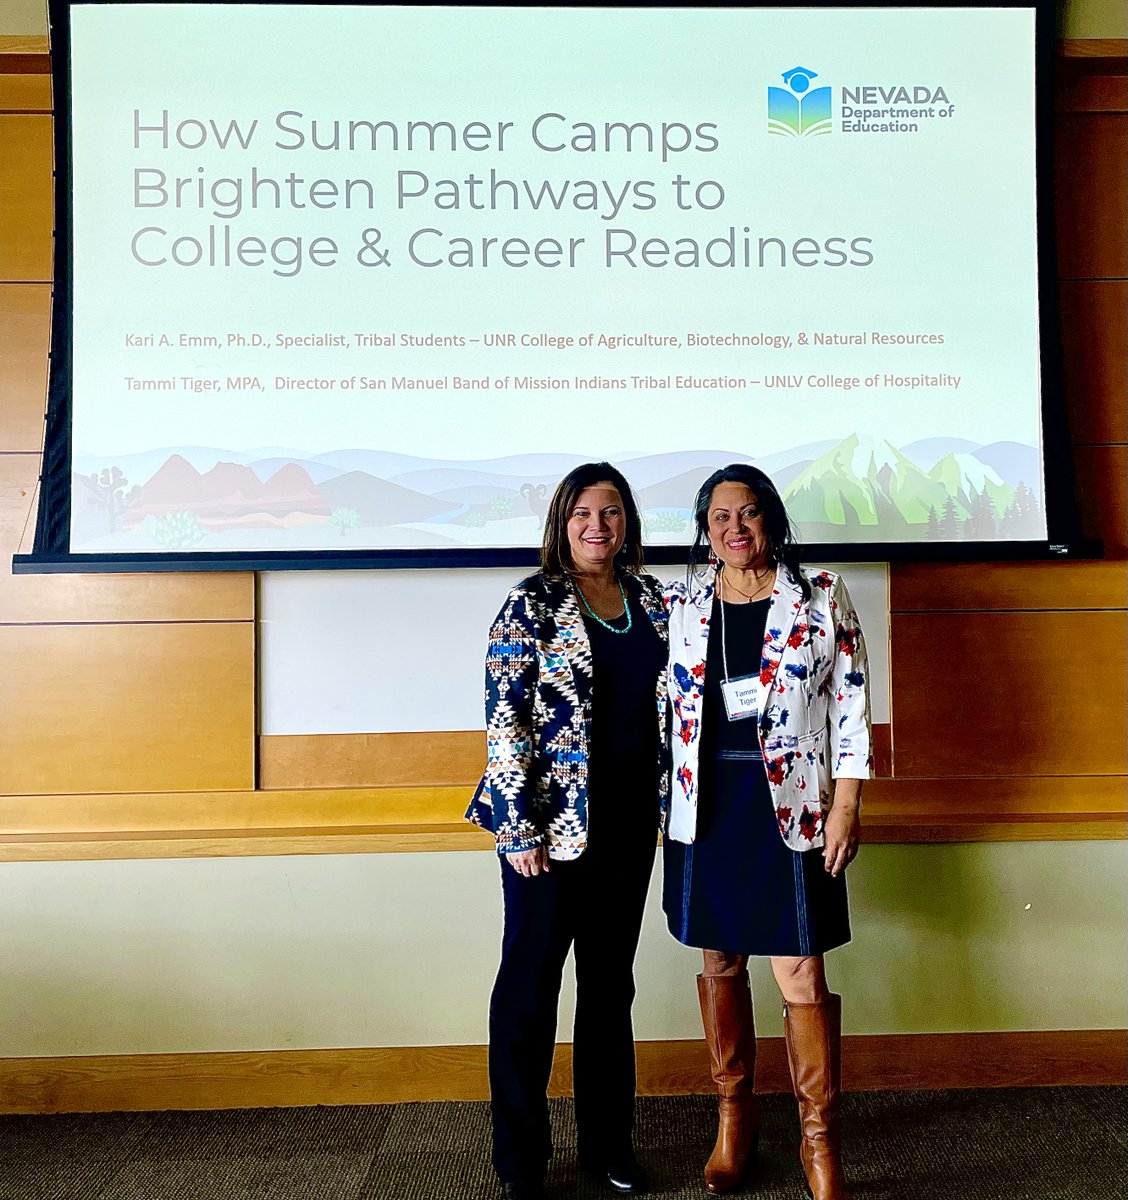 Our Tribal Education Initiative director Tammi Tiger participated in the Indian Education Summit last week in Reno! In a partnership with UNR's Tribal Students Program Tammi and Kari Emm spoke about how indigenous students prosper with college preparation camps. #TribalTuesday